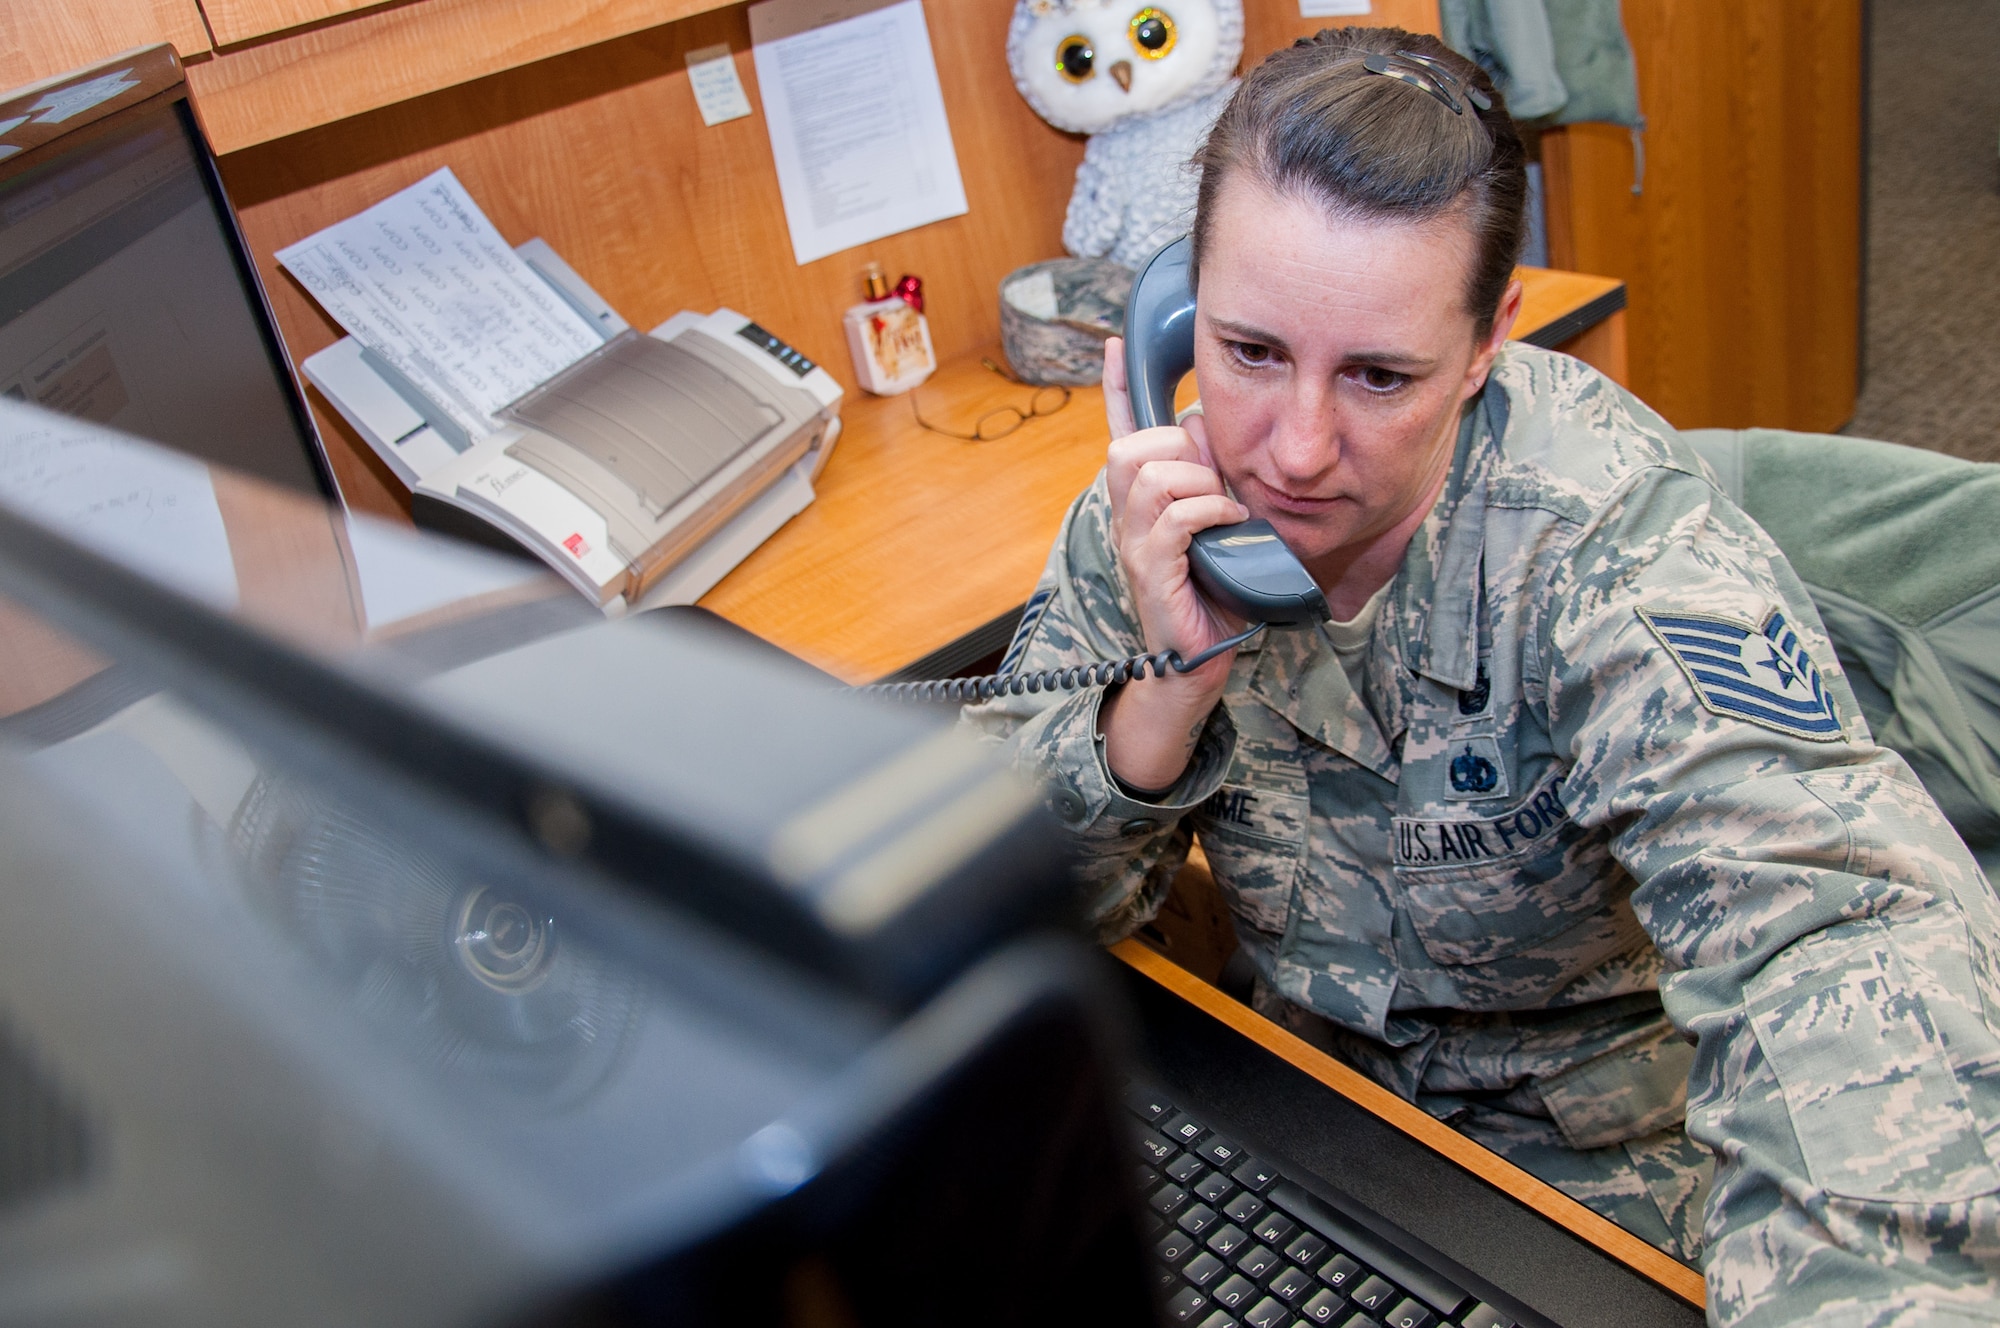 Tech Sgt. Jennifer Warehime, Academic Coding Branch noncommissioned officer-in-charge, provides phone support for an officer attempting to update his academic record. Two Airmen at the Coding Branch, including Warehime, update more than 1,000 transcripts a month in support of some 130,000 total force Air Force officers.  (U.S. Air Force photo/John Harrington) (U.S. Air Force photo/John Harrington)